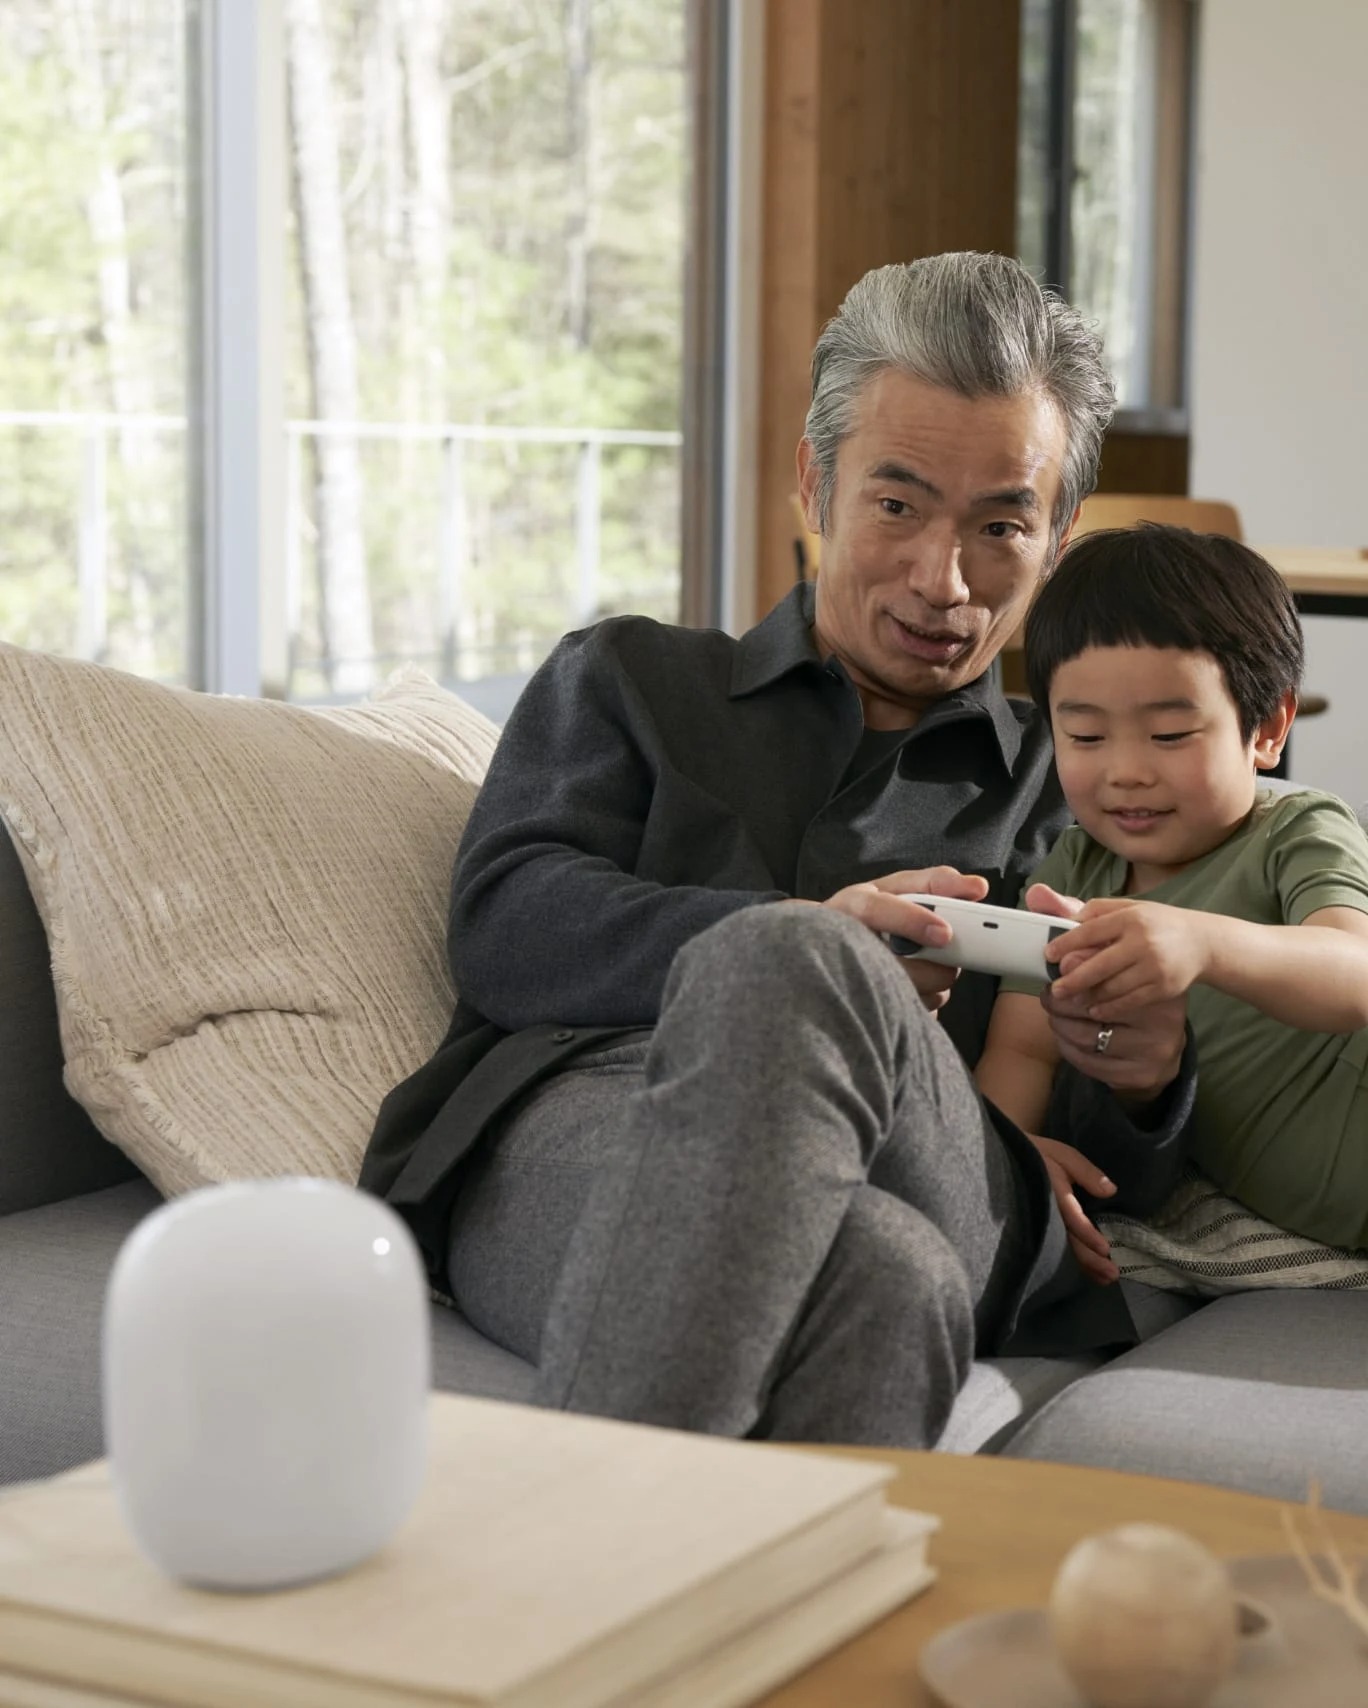 A man and a child playing a game on Stadia together, with the Nest Wifi Pro in the foreground